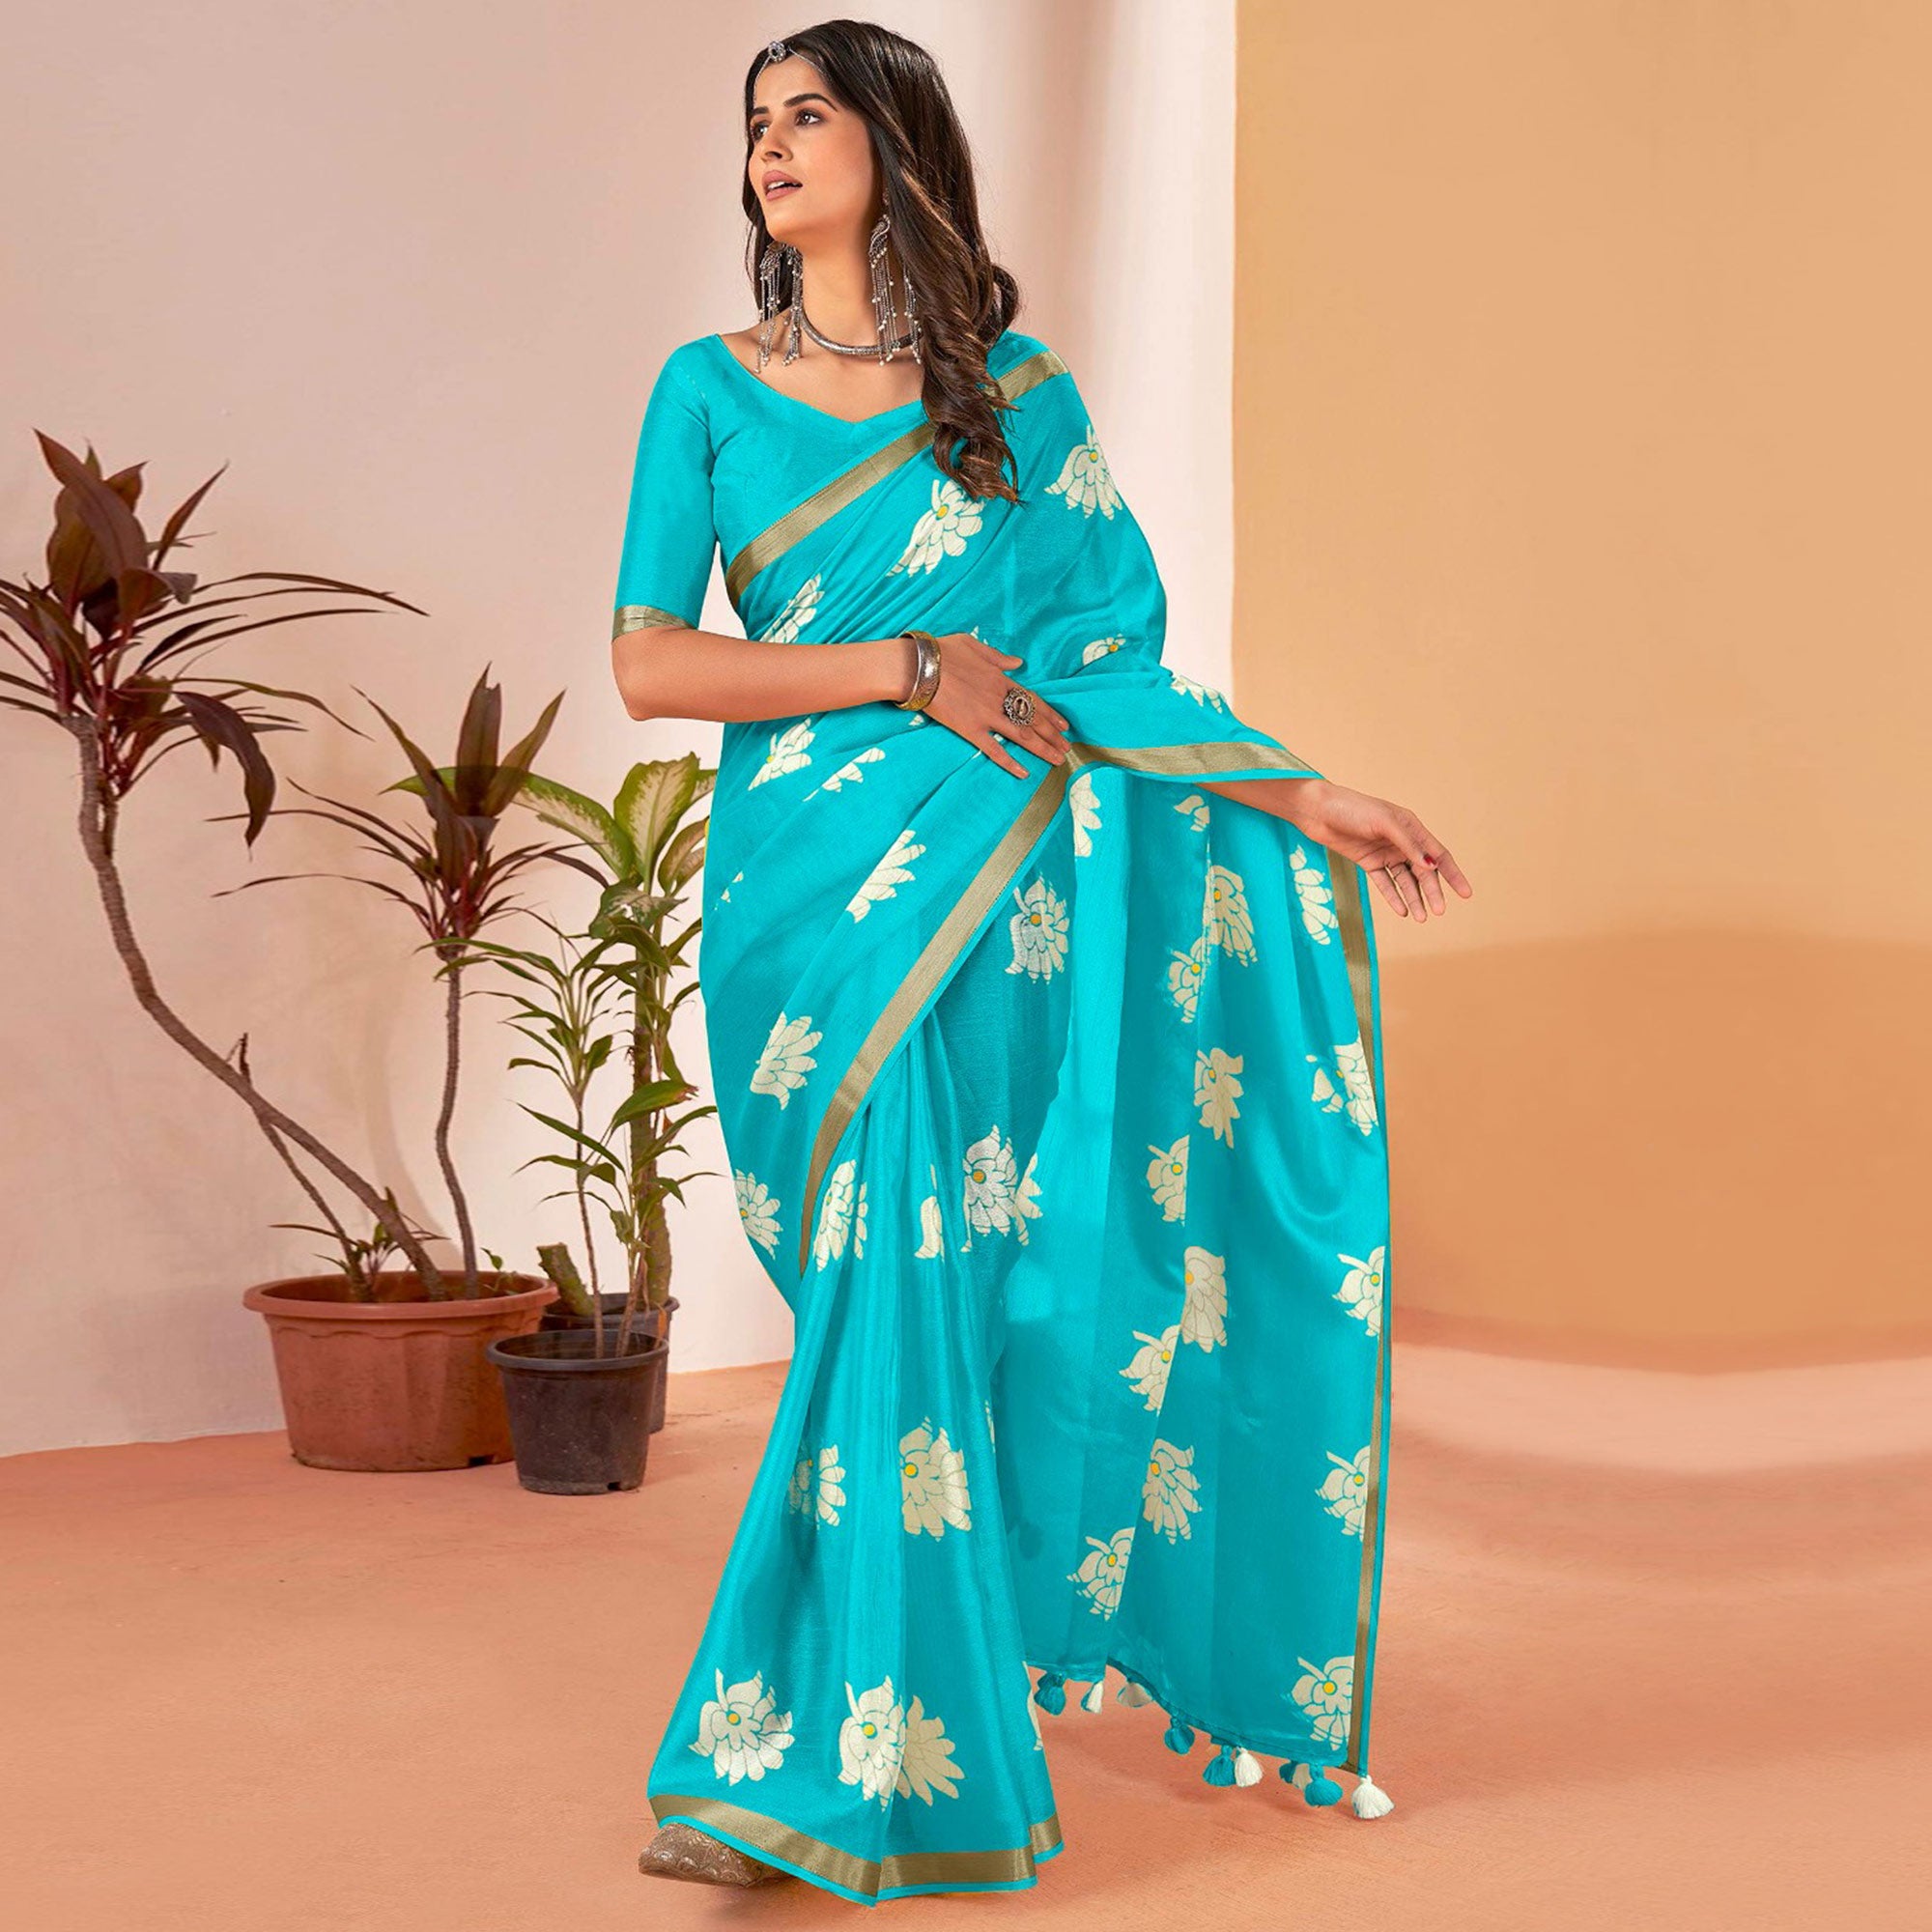 Turquoise Floral Printed Cotton Blend Saree With Tassels